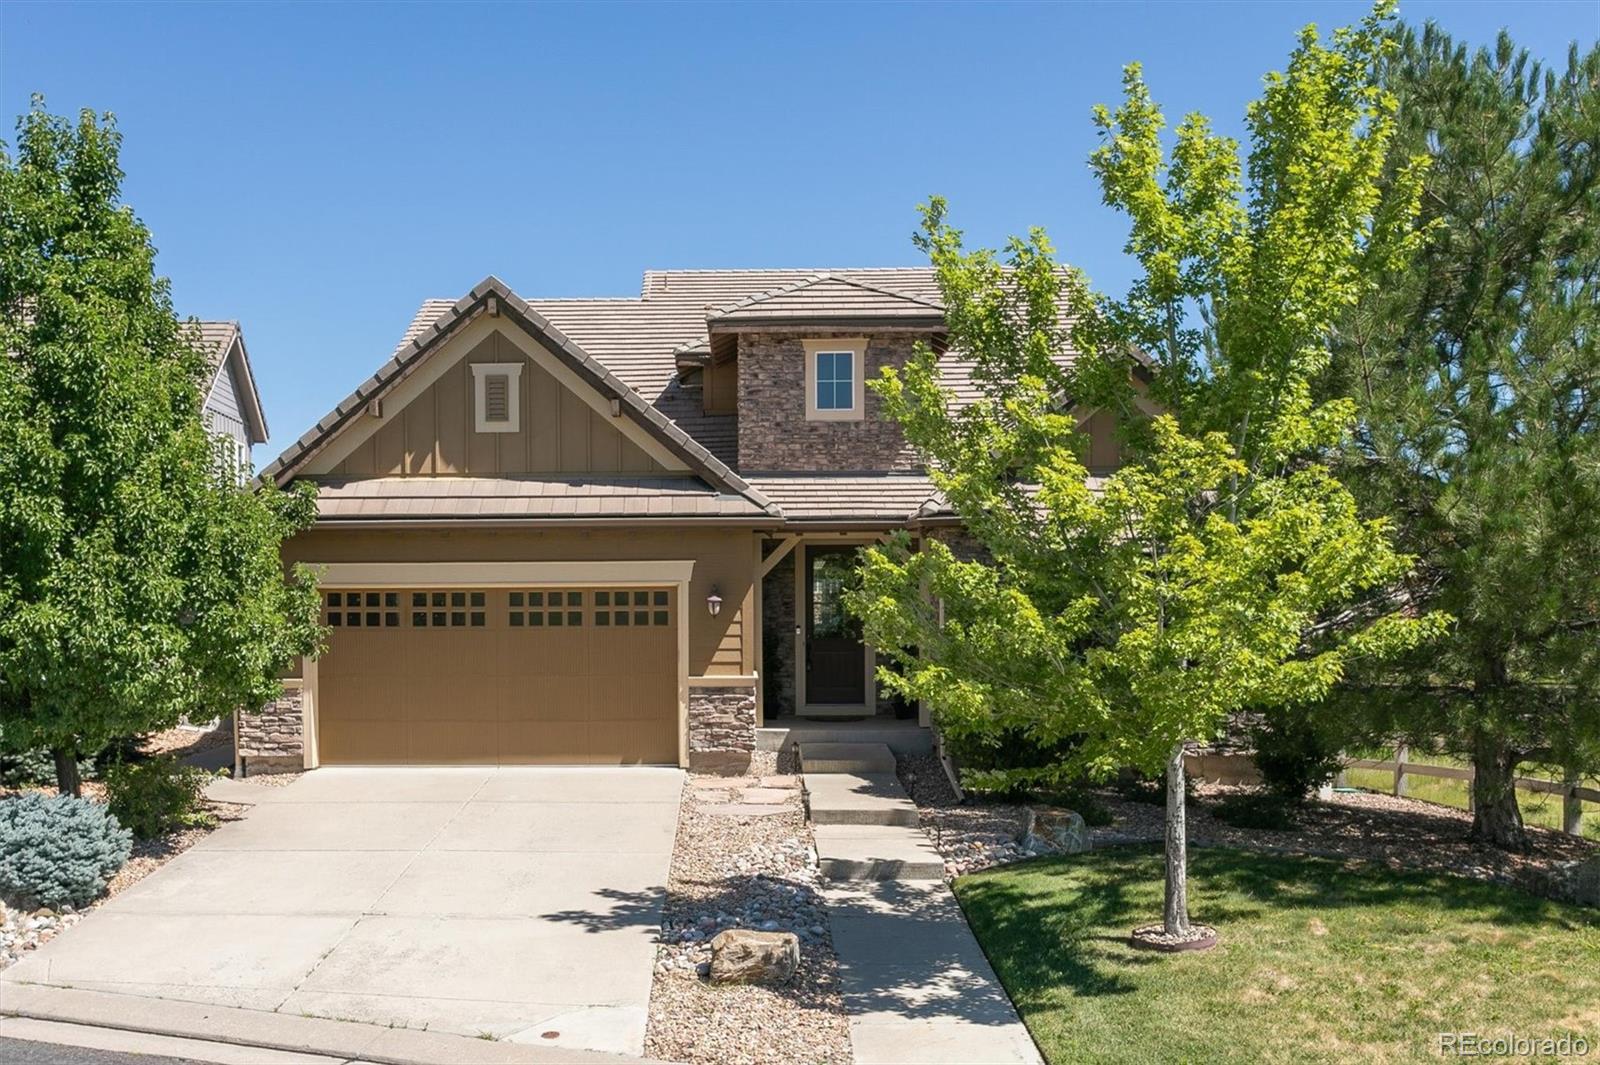 579  Backcountry Lane, highlands ranch MLS: 1813033 Beds: 2 Baths: 4 Price: $1,199,999